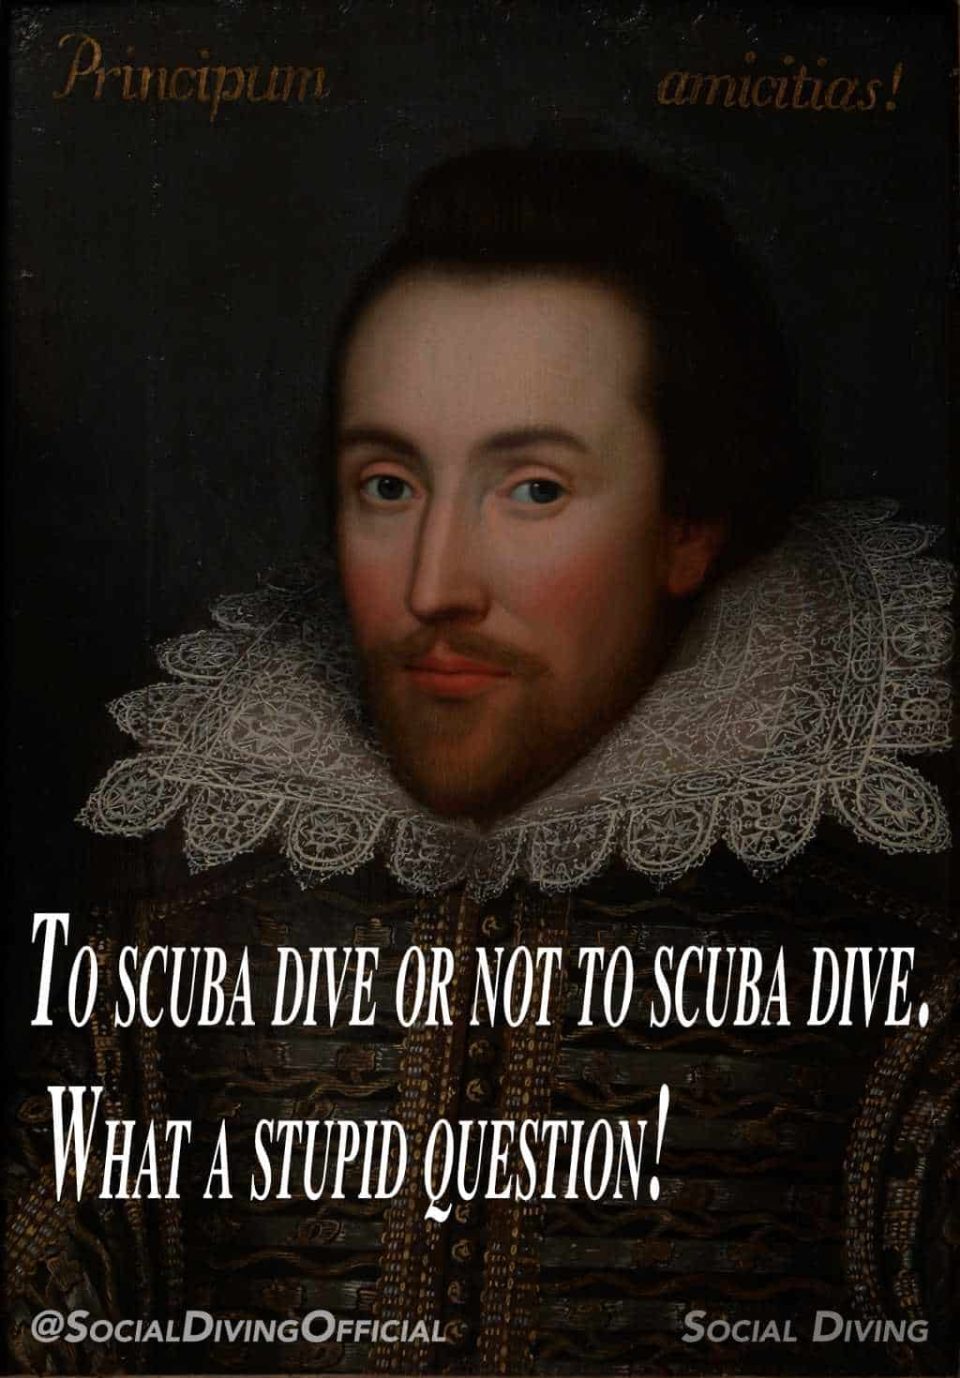 To scuba dive or not to scuba dive. What a stupid question!